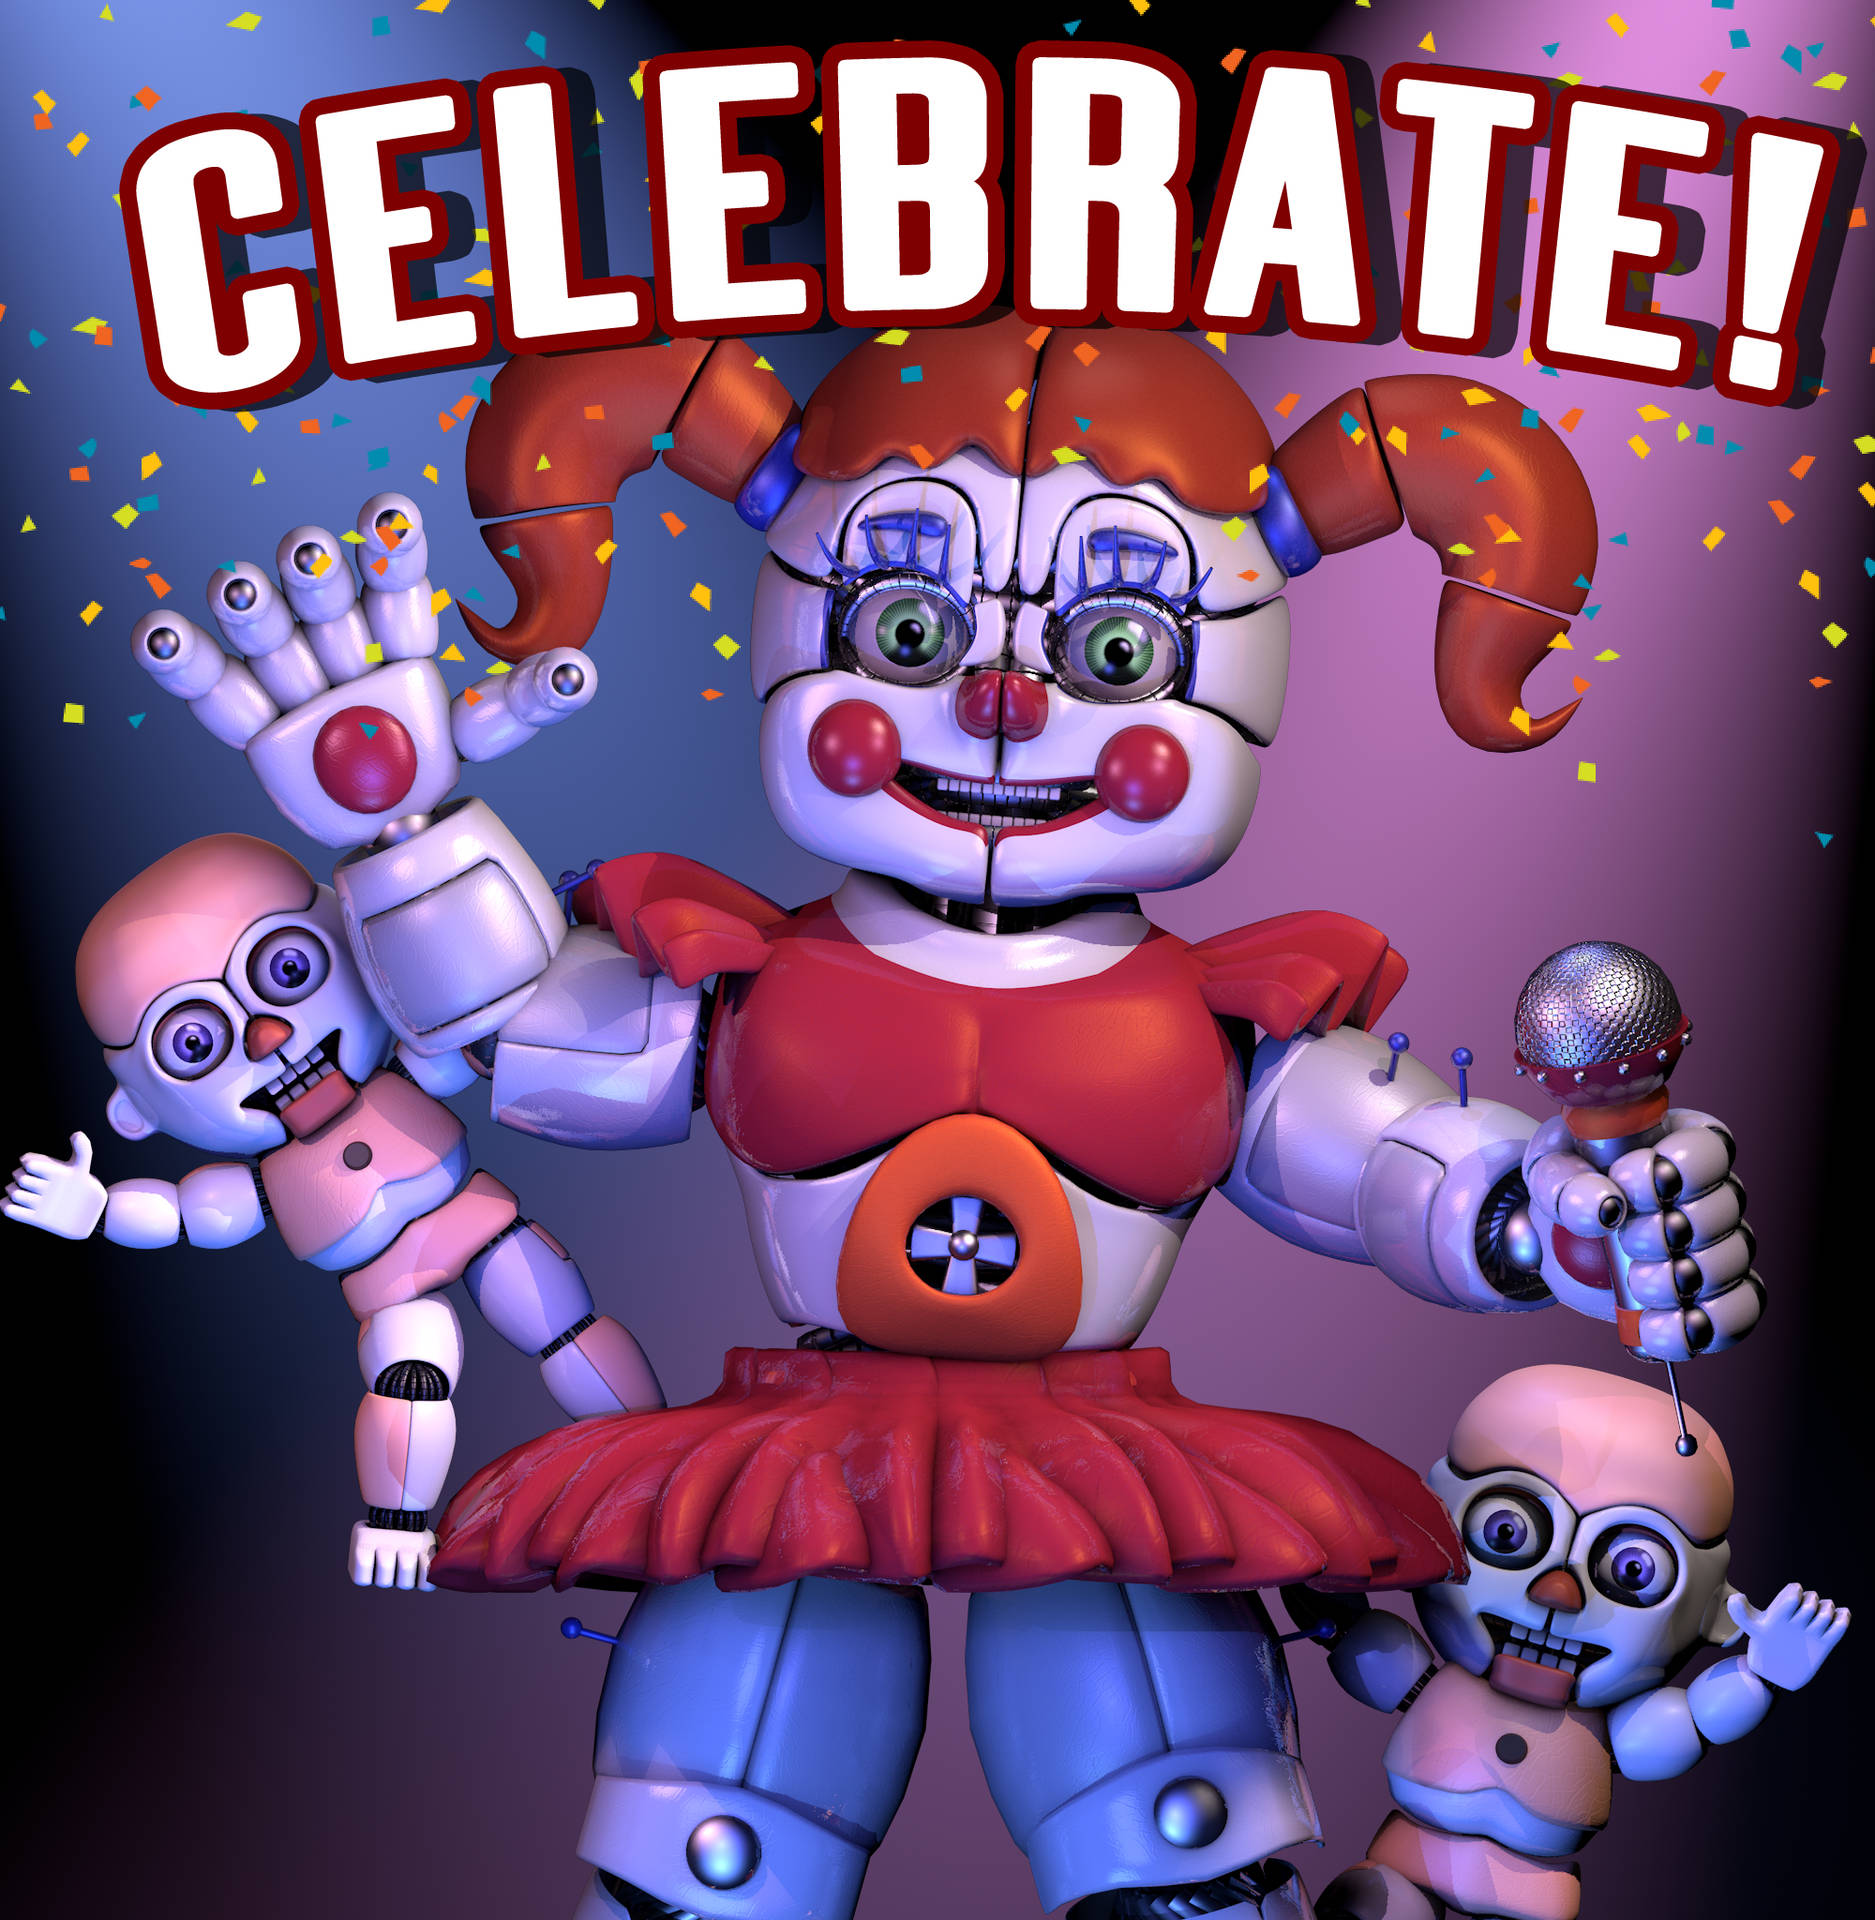 Exciting Circus Baby Celebration Background